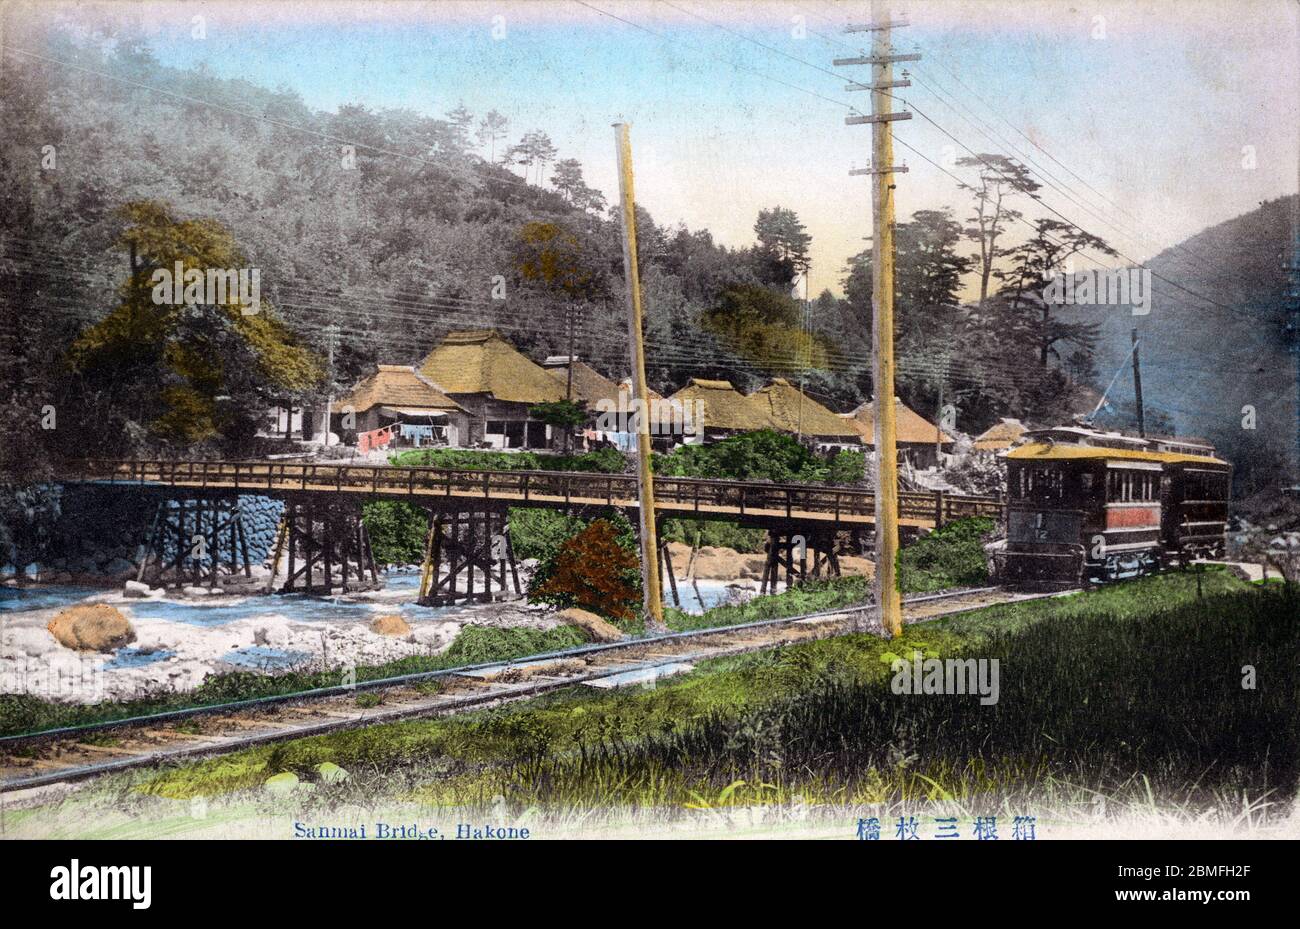 [ 1900s Japan - Train in Japanese Countryside ] —   A train rides along the Hayakawa River (早川) at Sanmaibashi (三枚橋) in Hakone, Kanagawa Prefecture. At the back, teahouses with thatched roofs are visible.  20th century vintage postcard. Stock Photo